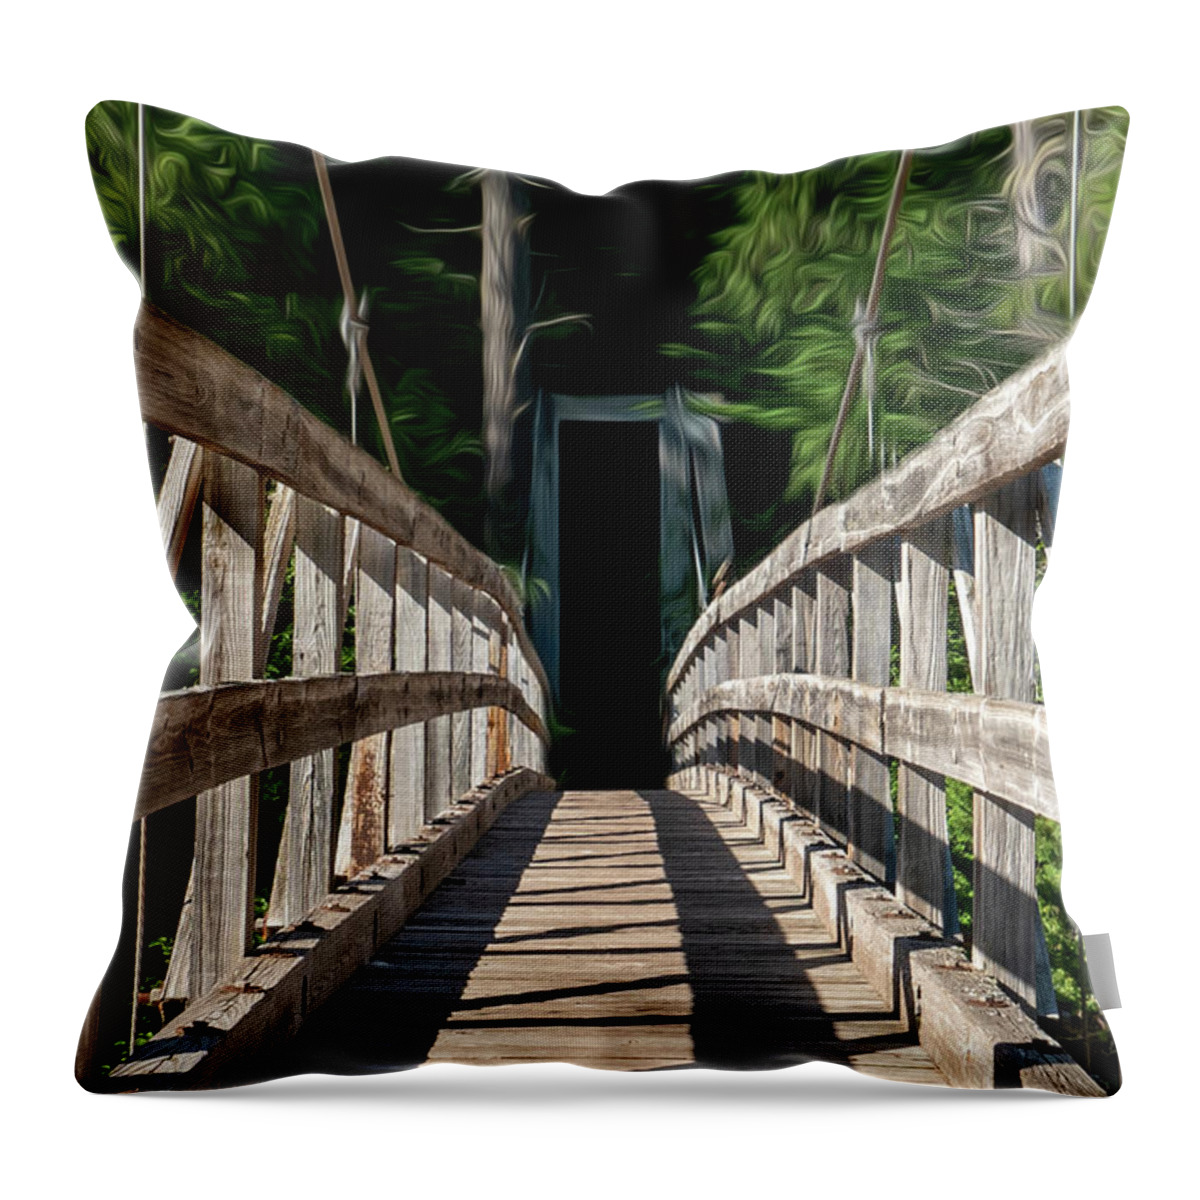 North Country National Scenic Trail Throw Pillow featuring the photograph North Country National Scenic Trail by Sandra J's